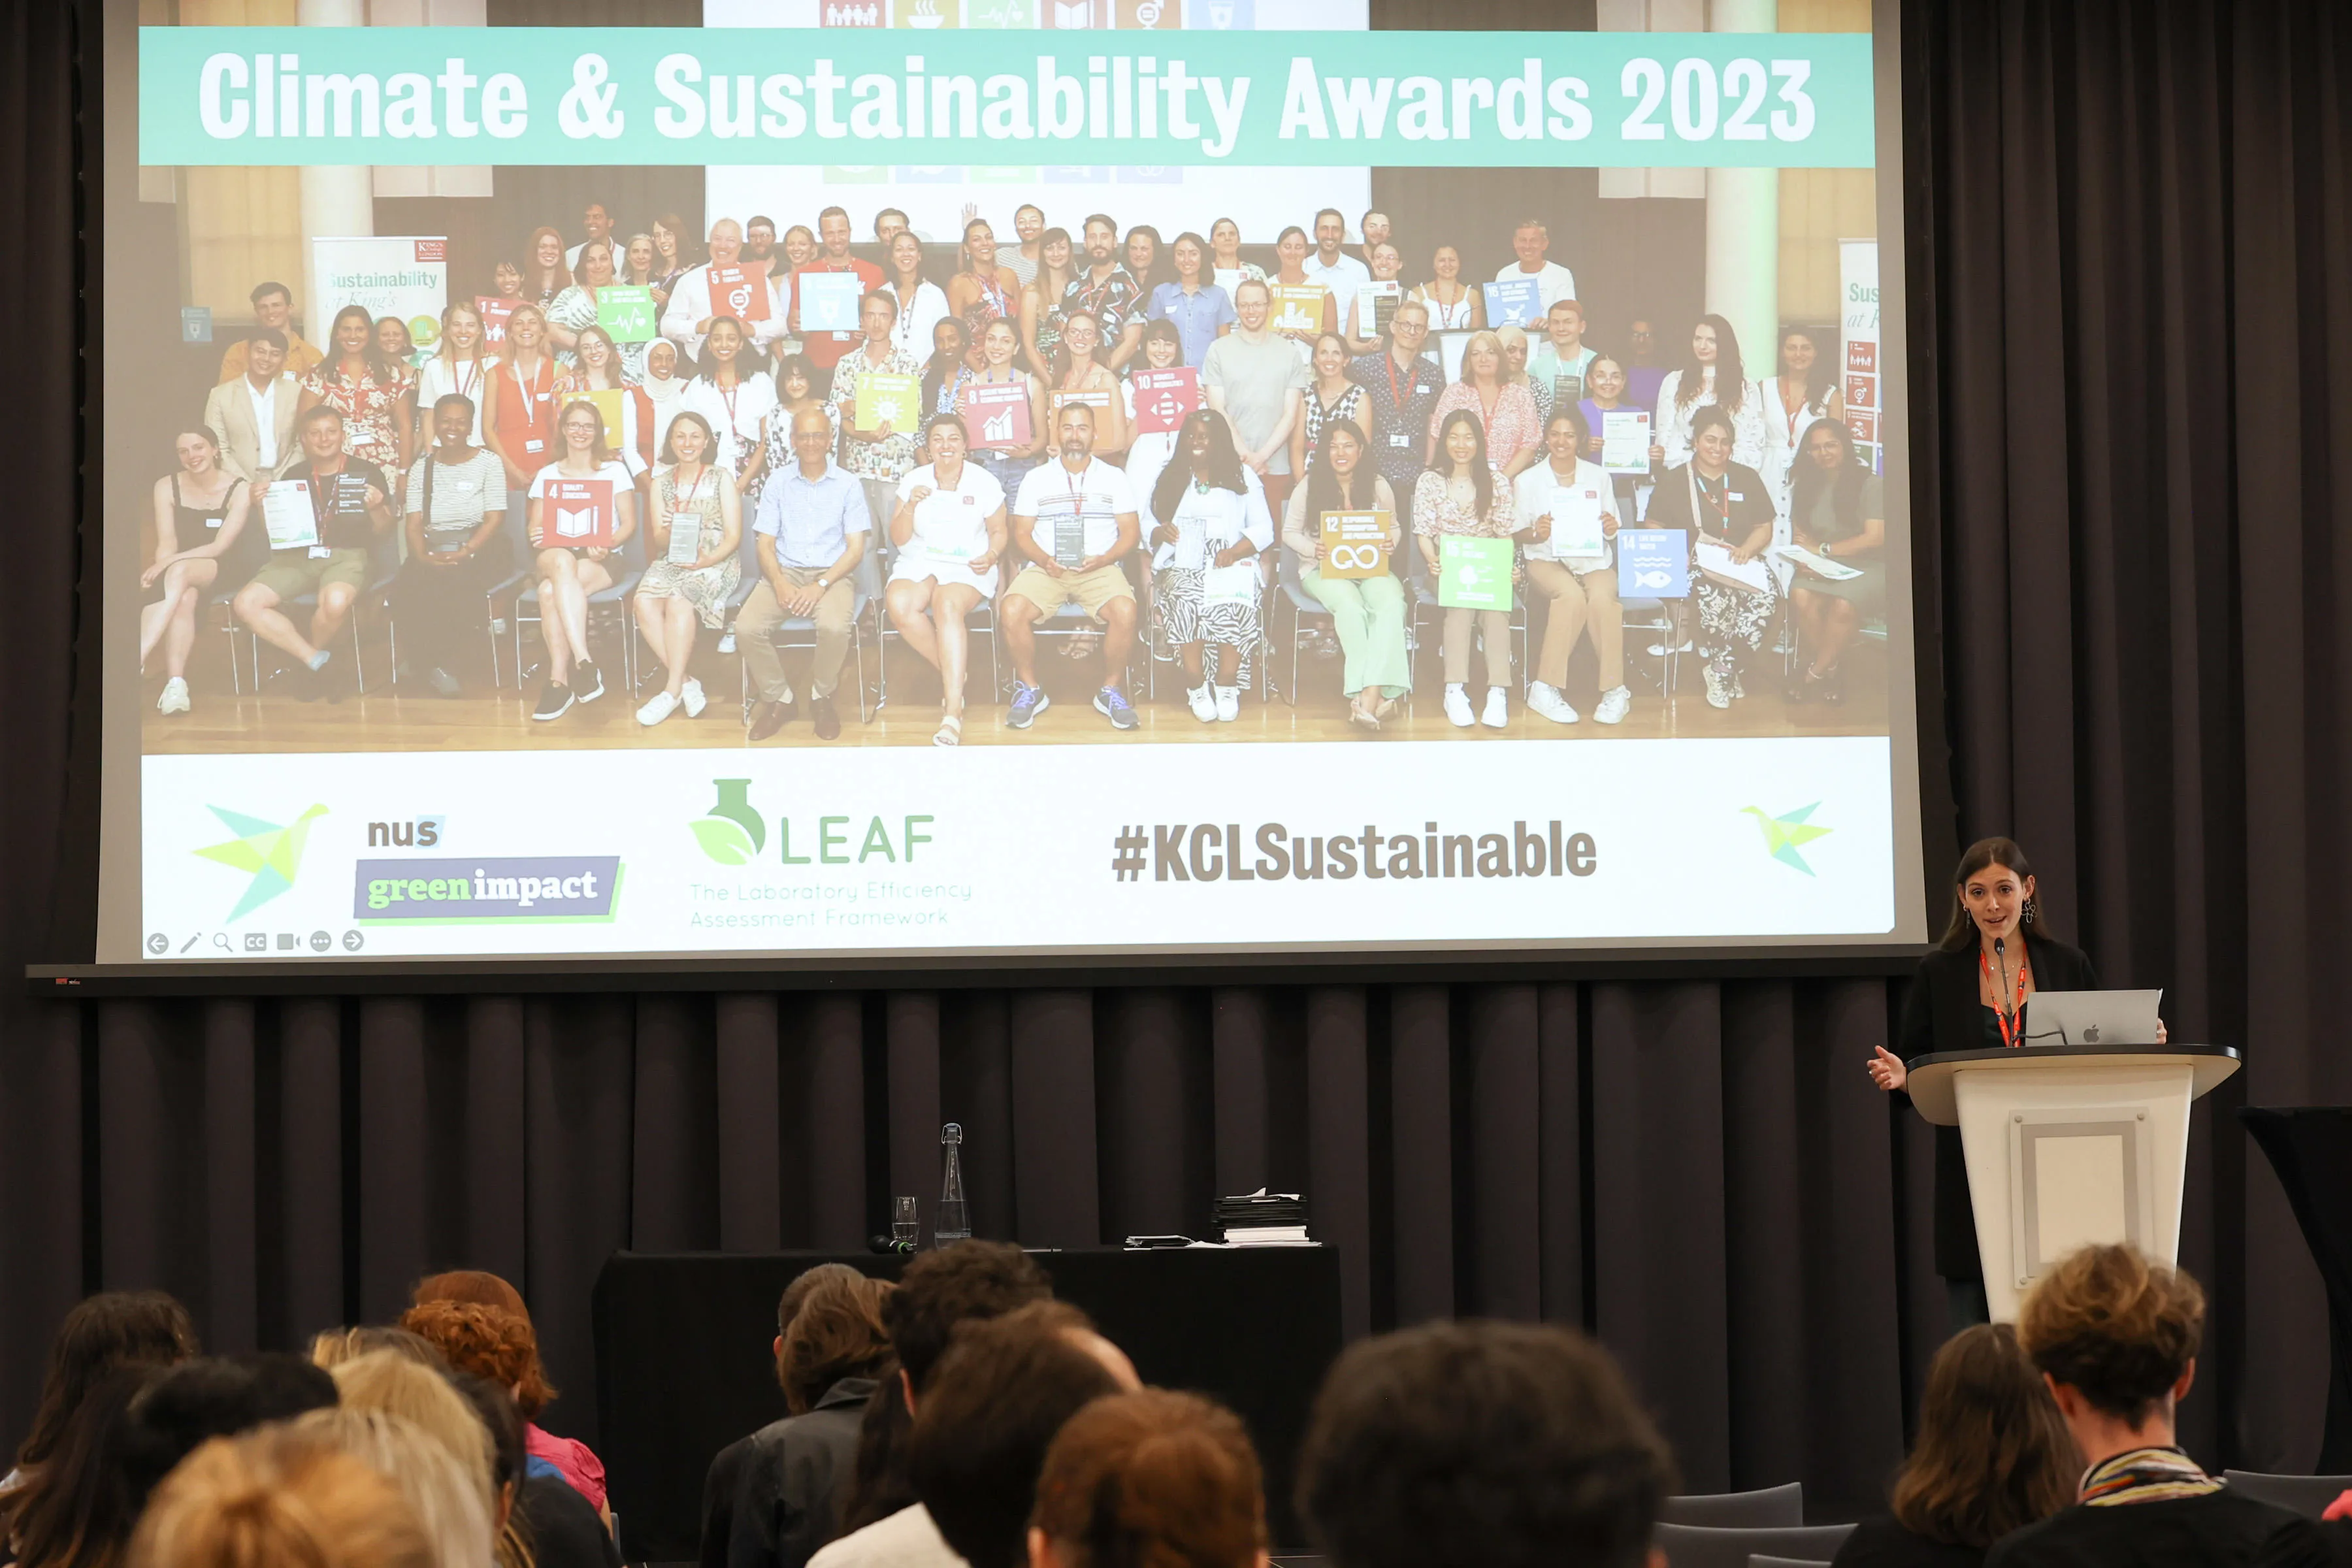 Climate & Sustainability Officer Rosa Roe Garcia welcoming everyone to the awards ceremony. 